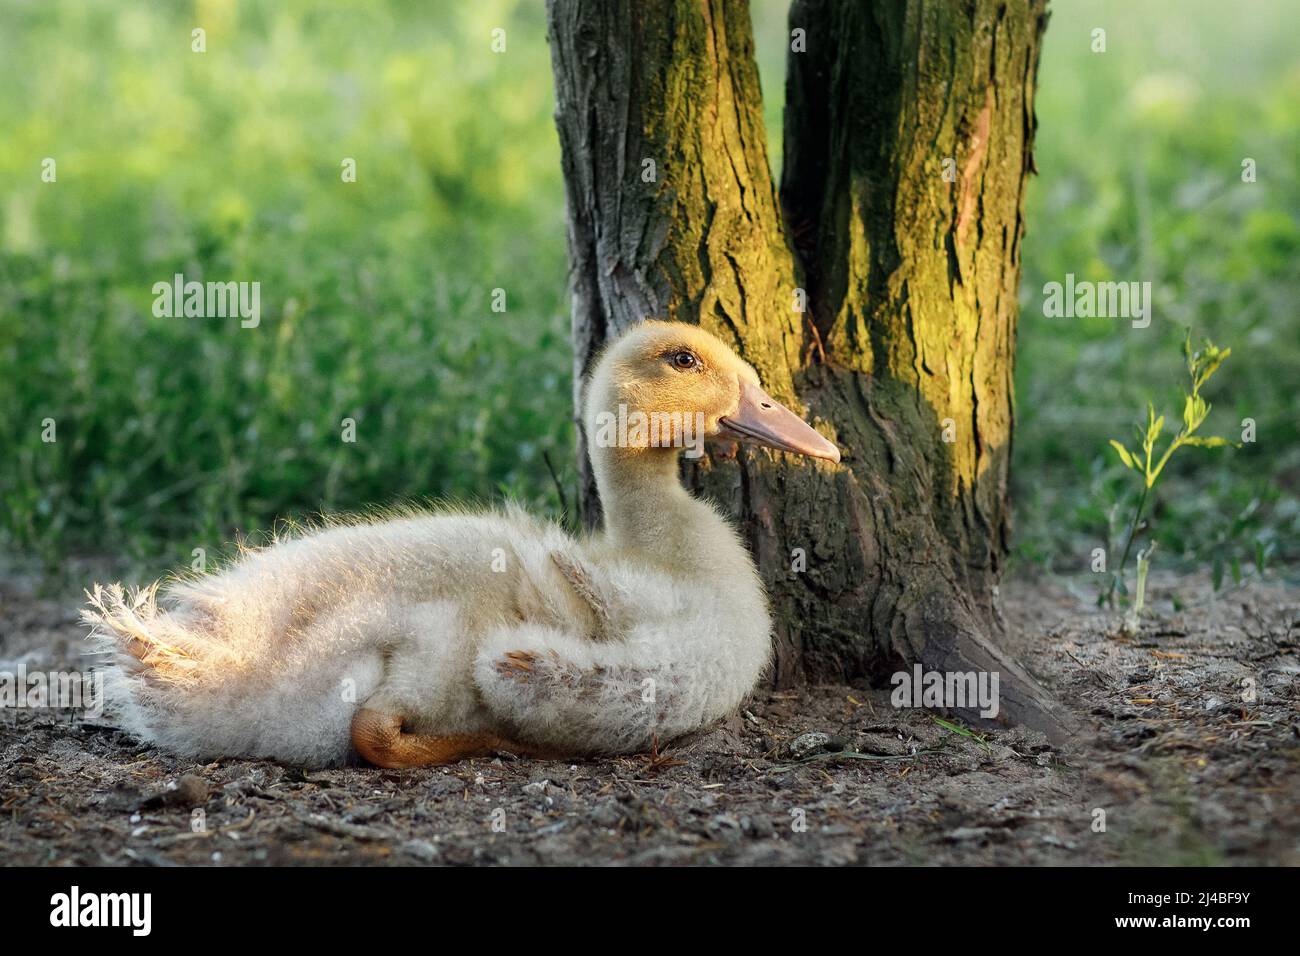 Adorable little baby Muscovy duckling rest under a tree in the shade. Beautiful evening golden sunlight and a blurred green background. Stock Photo